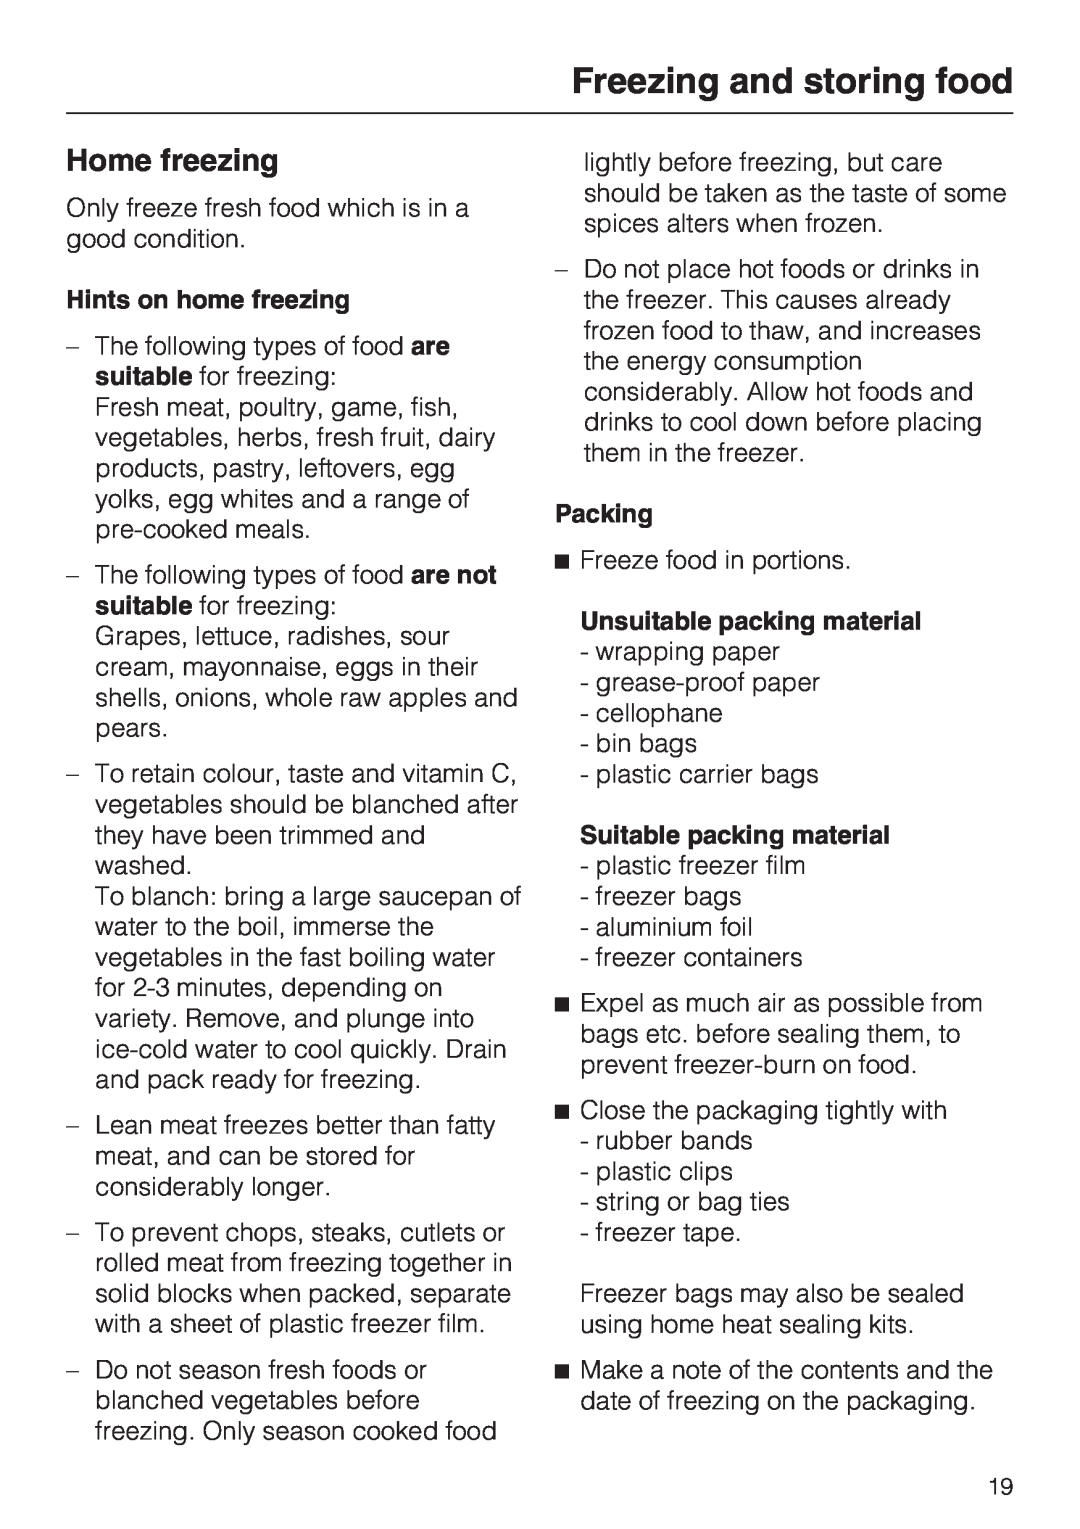 Miele FN 12620 S Home freezing, Hints on home freezing, Packing, Unsuitable packing material, Suitable packing material 